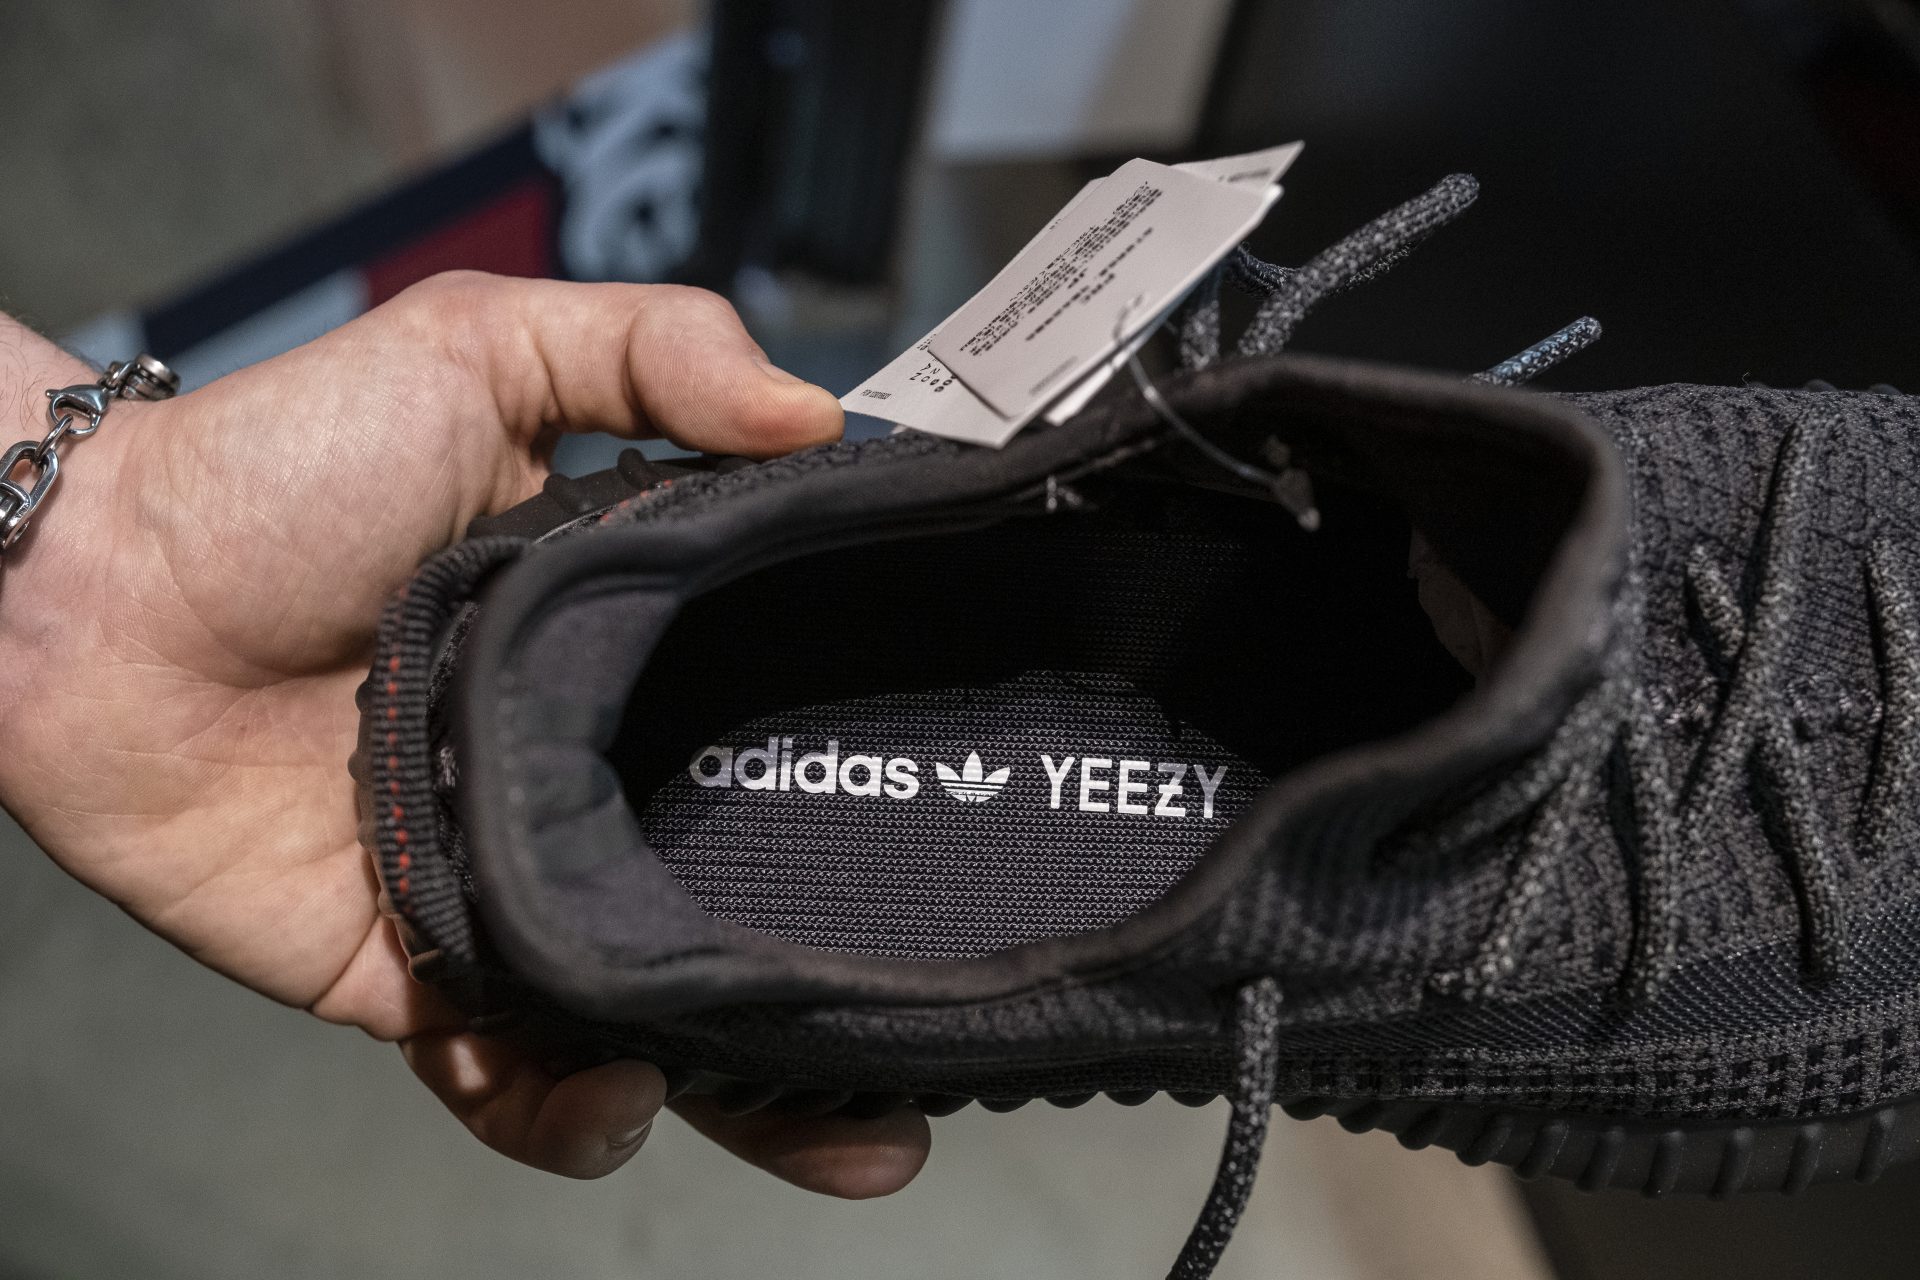 Adidas Resumes Selling Remaining Yeezy Inventory, Proceeds To Be Donated To Anti-Hate Organizations